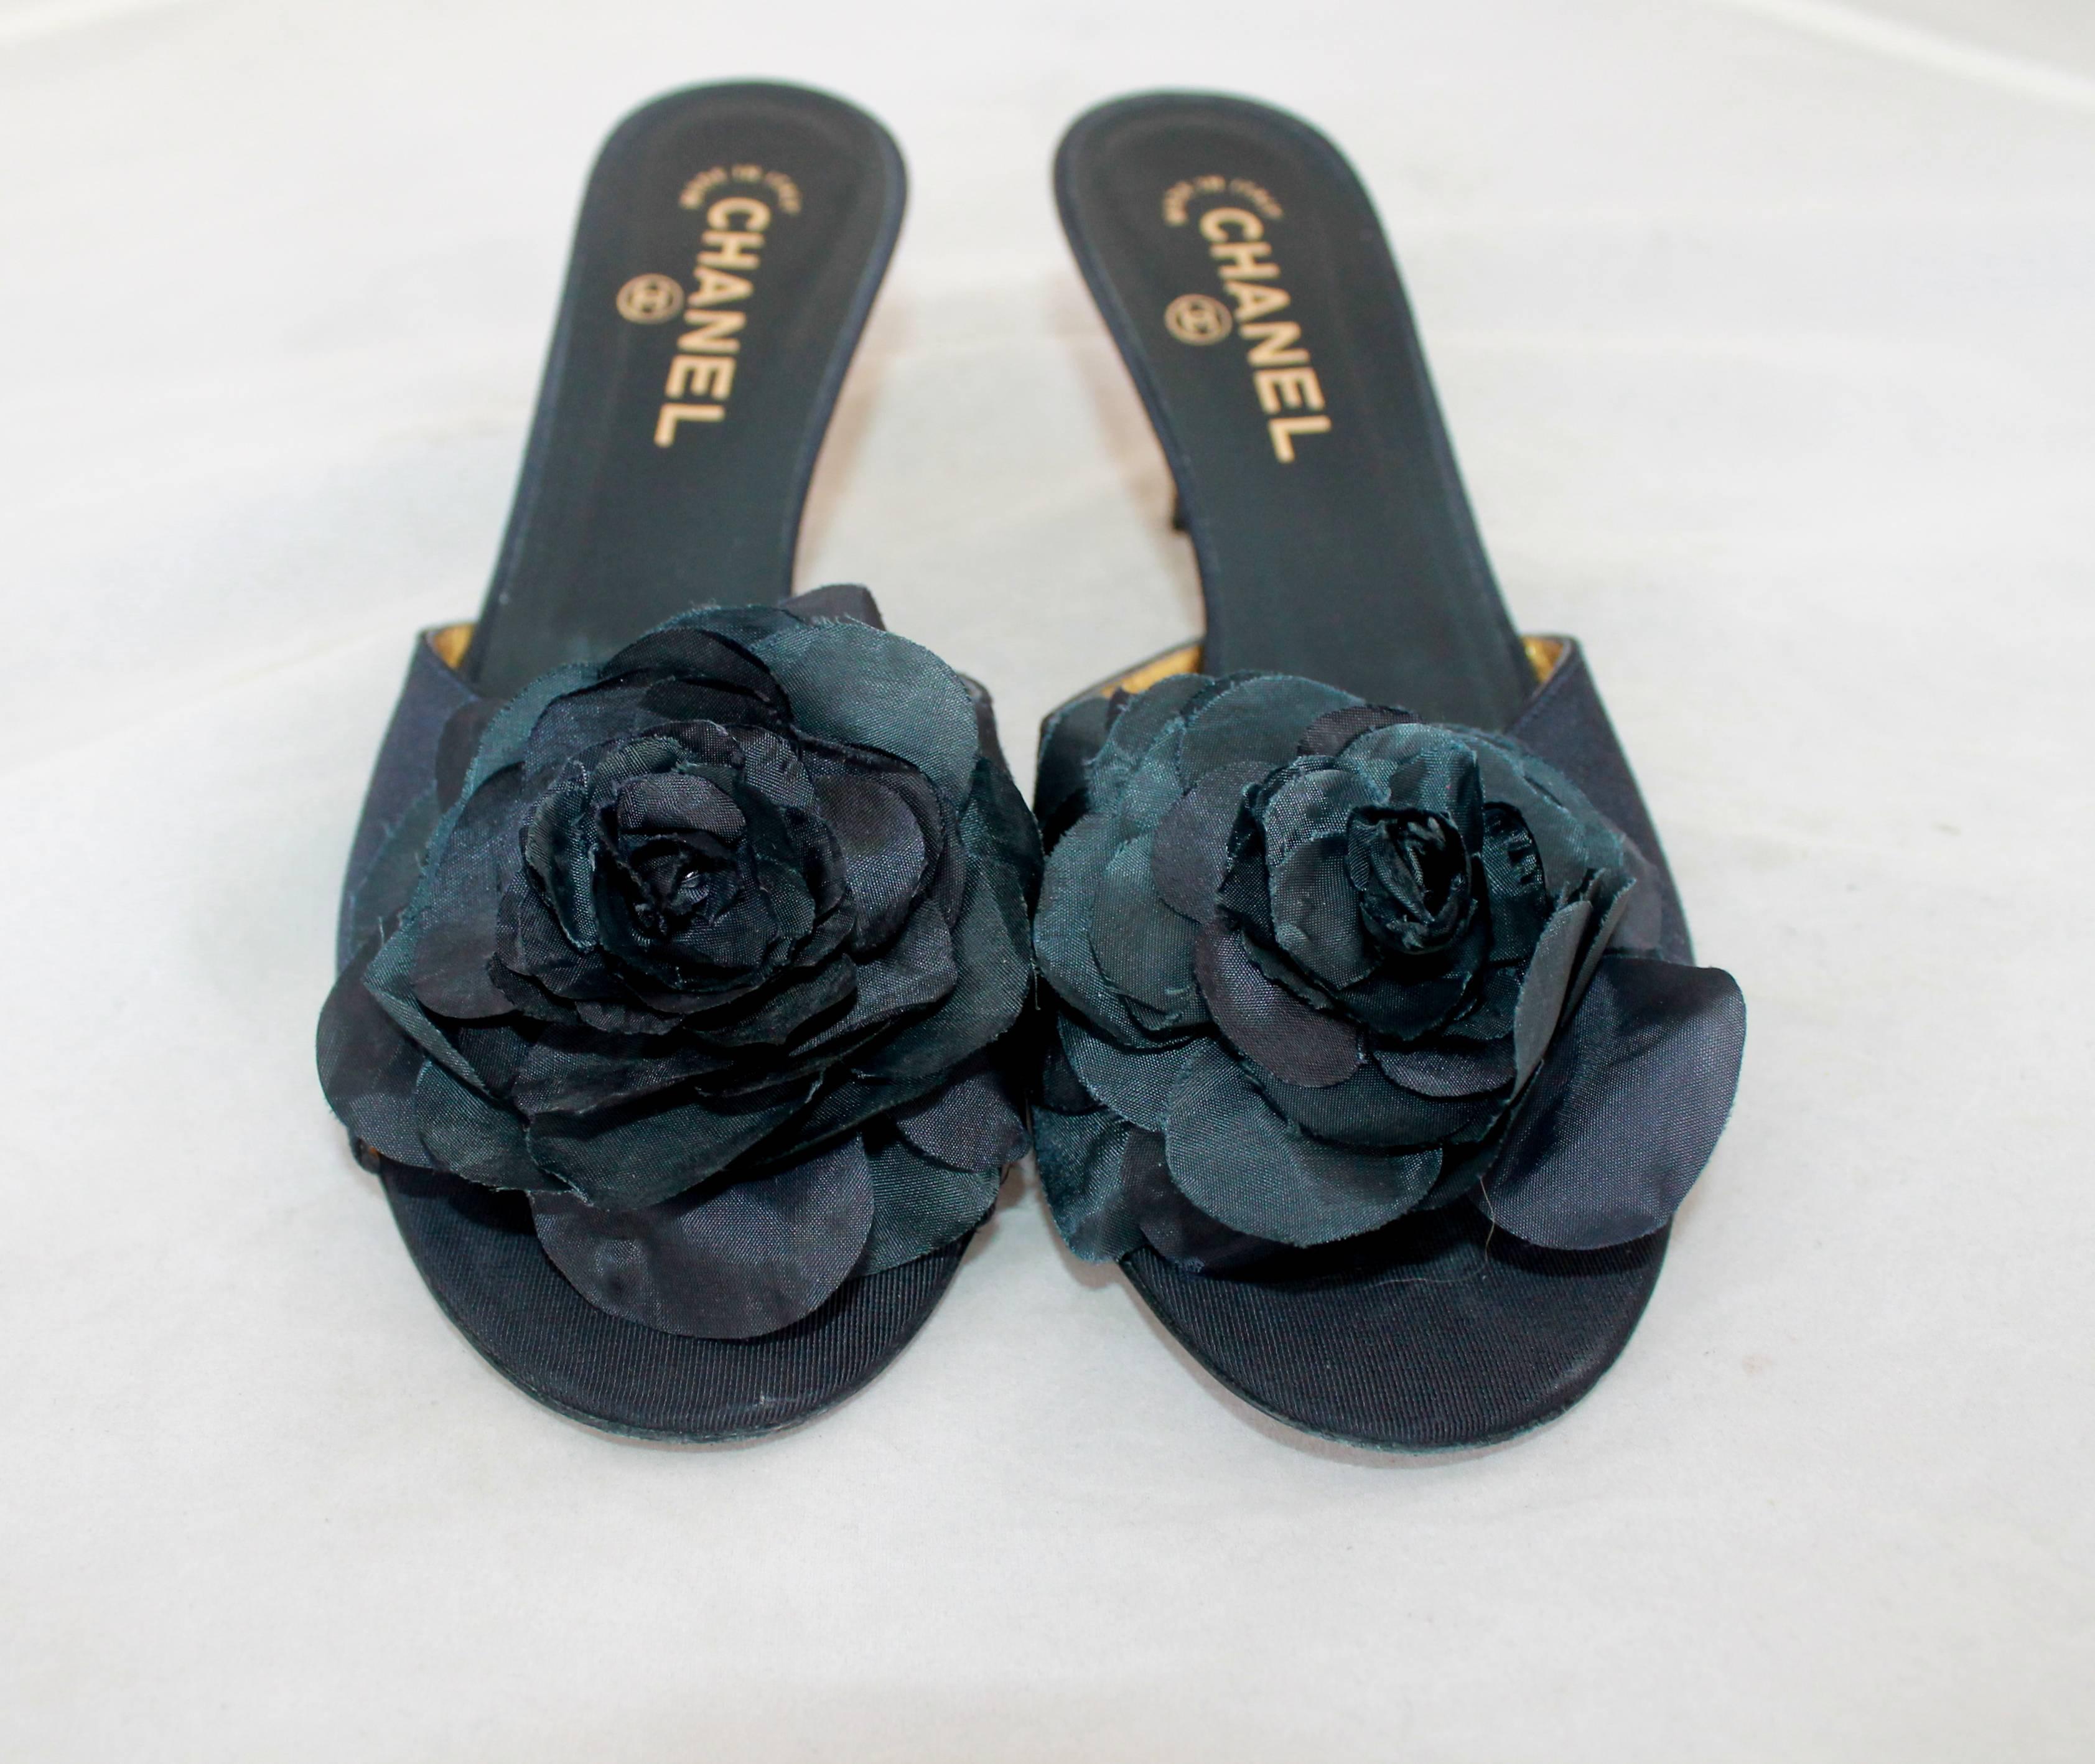 Chanel Navy Silk Faille Slide w/ Camellia & Geometric Etched Gold Heel - 40.  These slides are in excellent condition with slight wear to the sole.  They have a large, elegant silk camellia on the front.  They have a unique geometric, etched gold